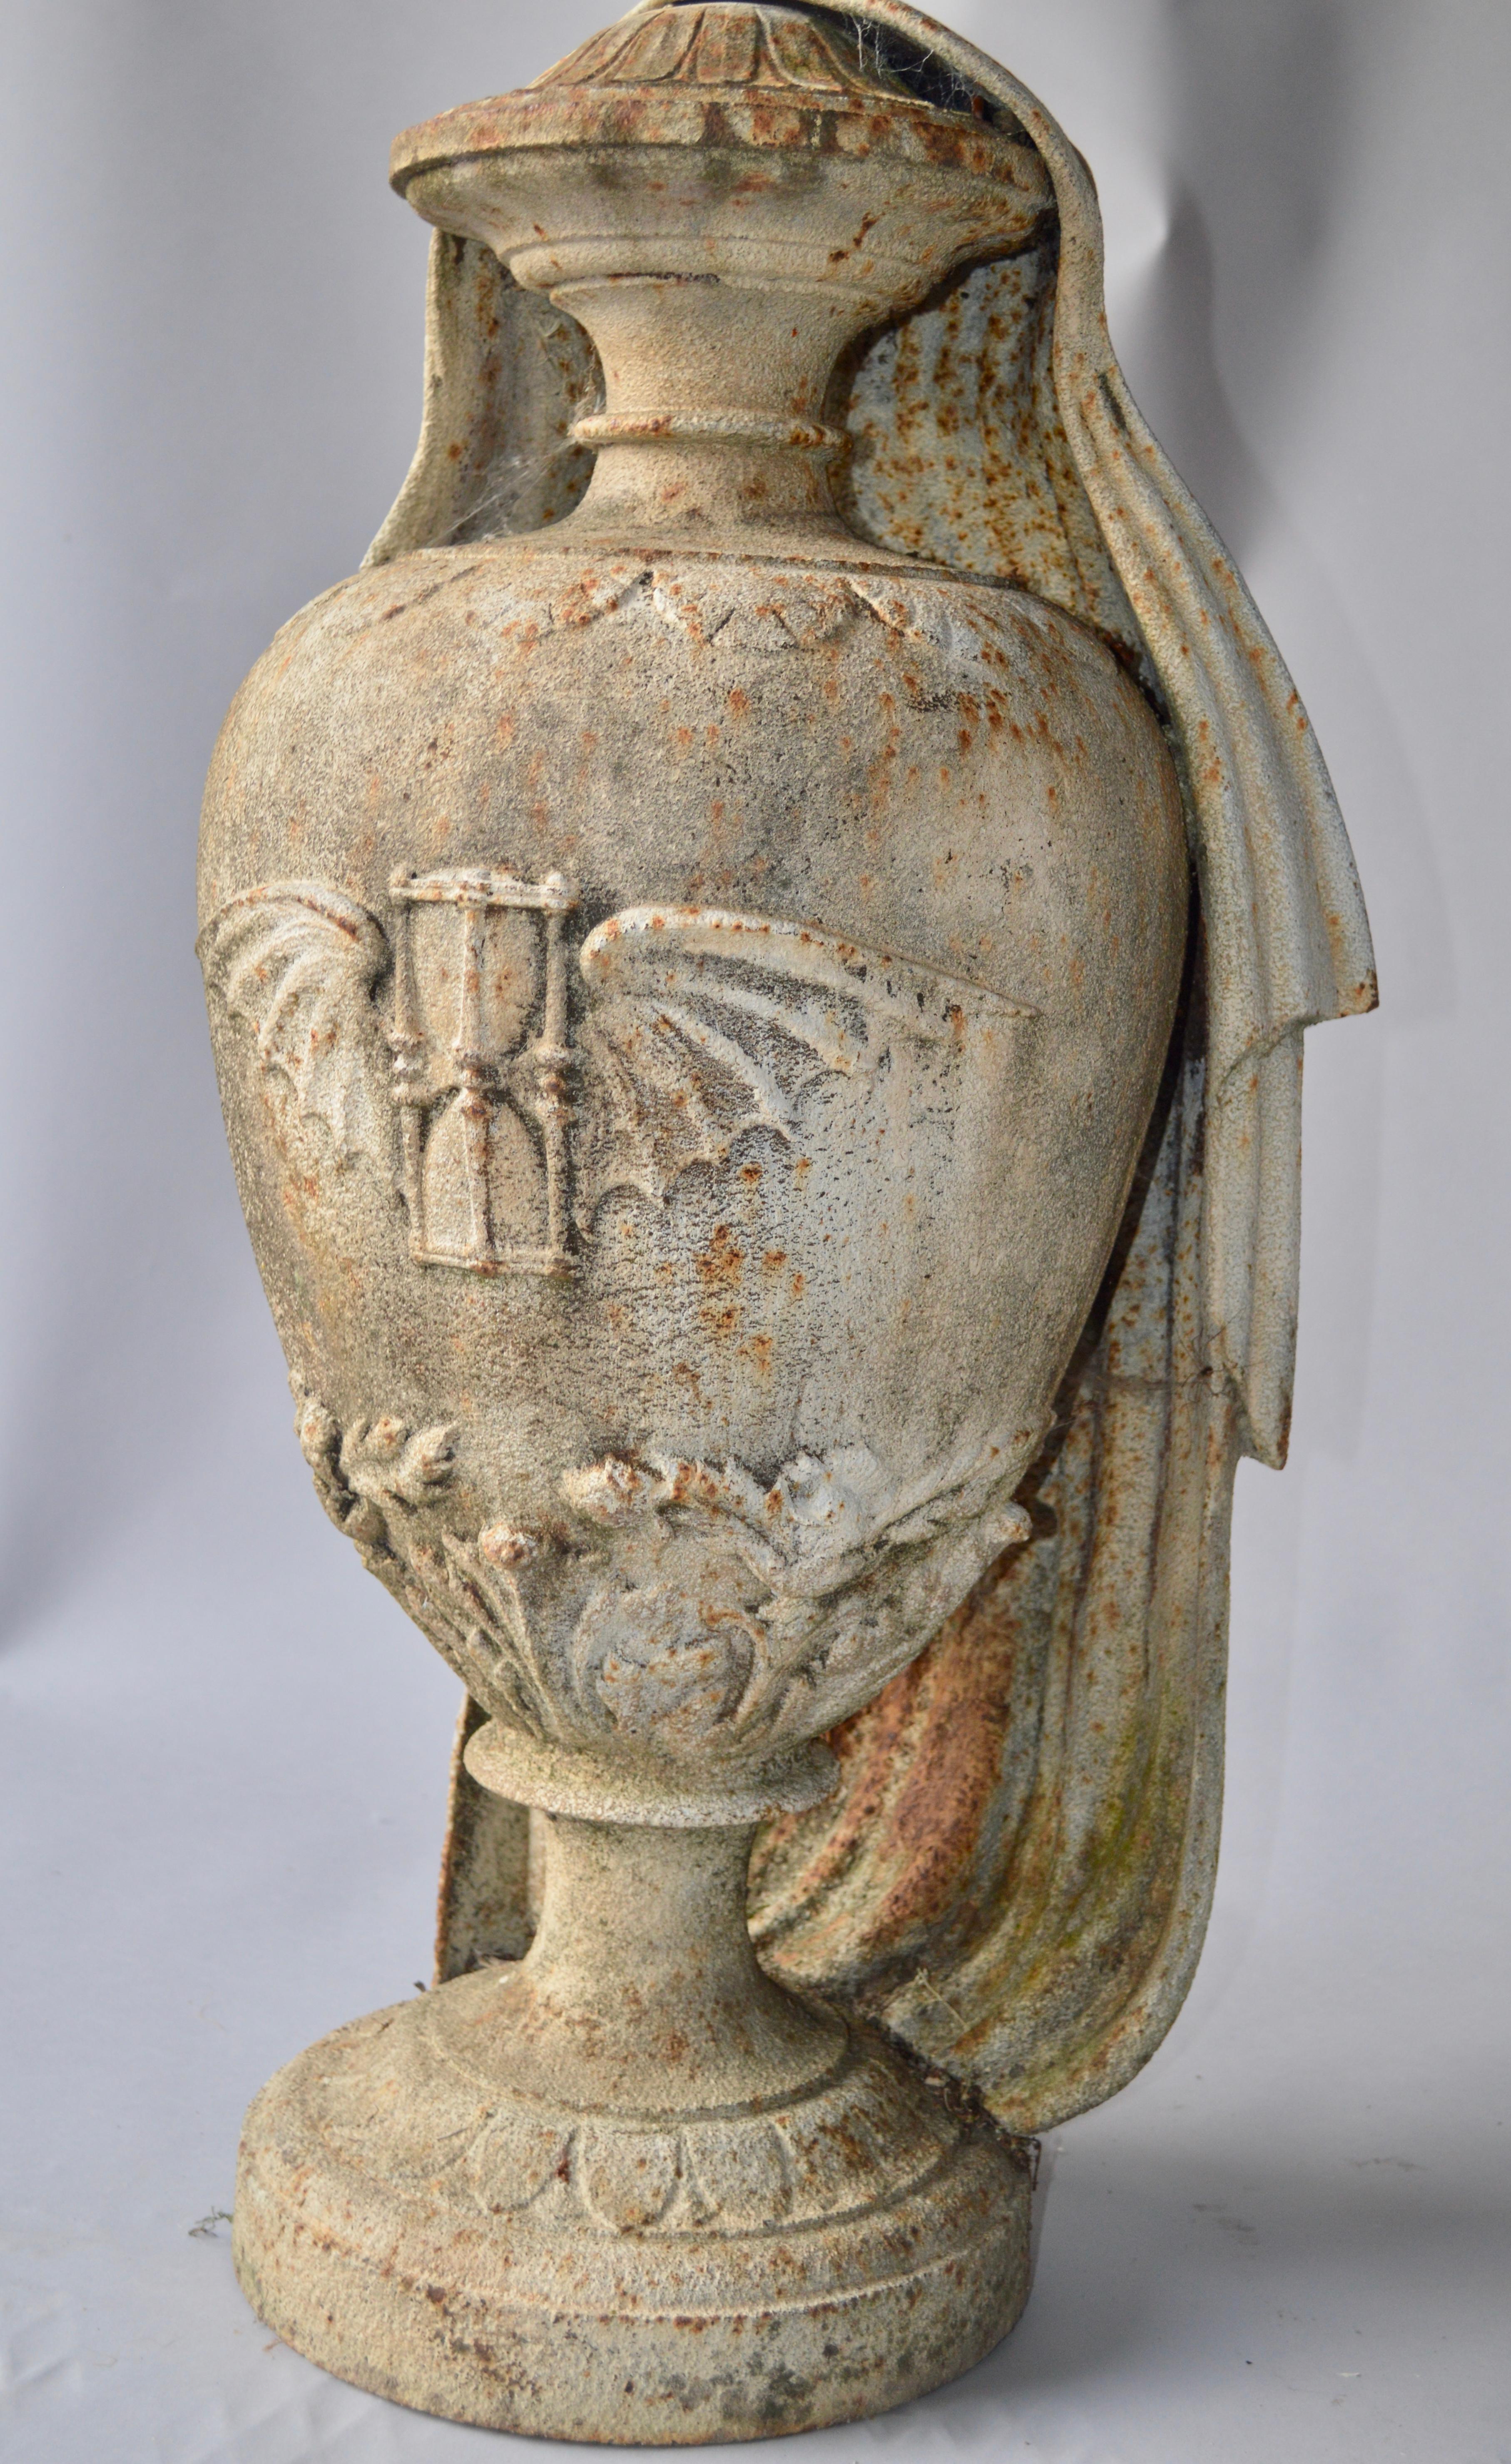 19th century cast iron urn with motive of bat and hourglass and backside draped in cloth.